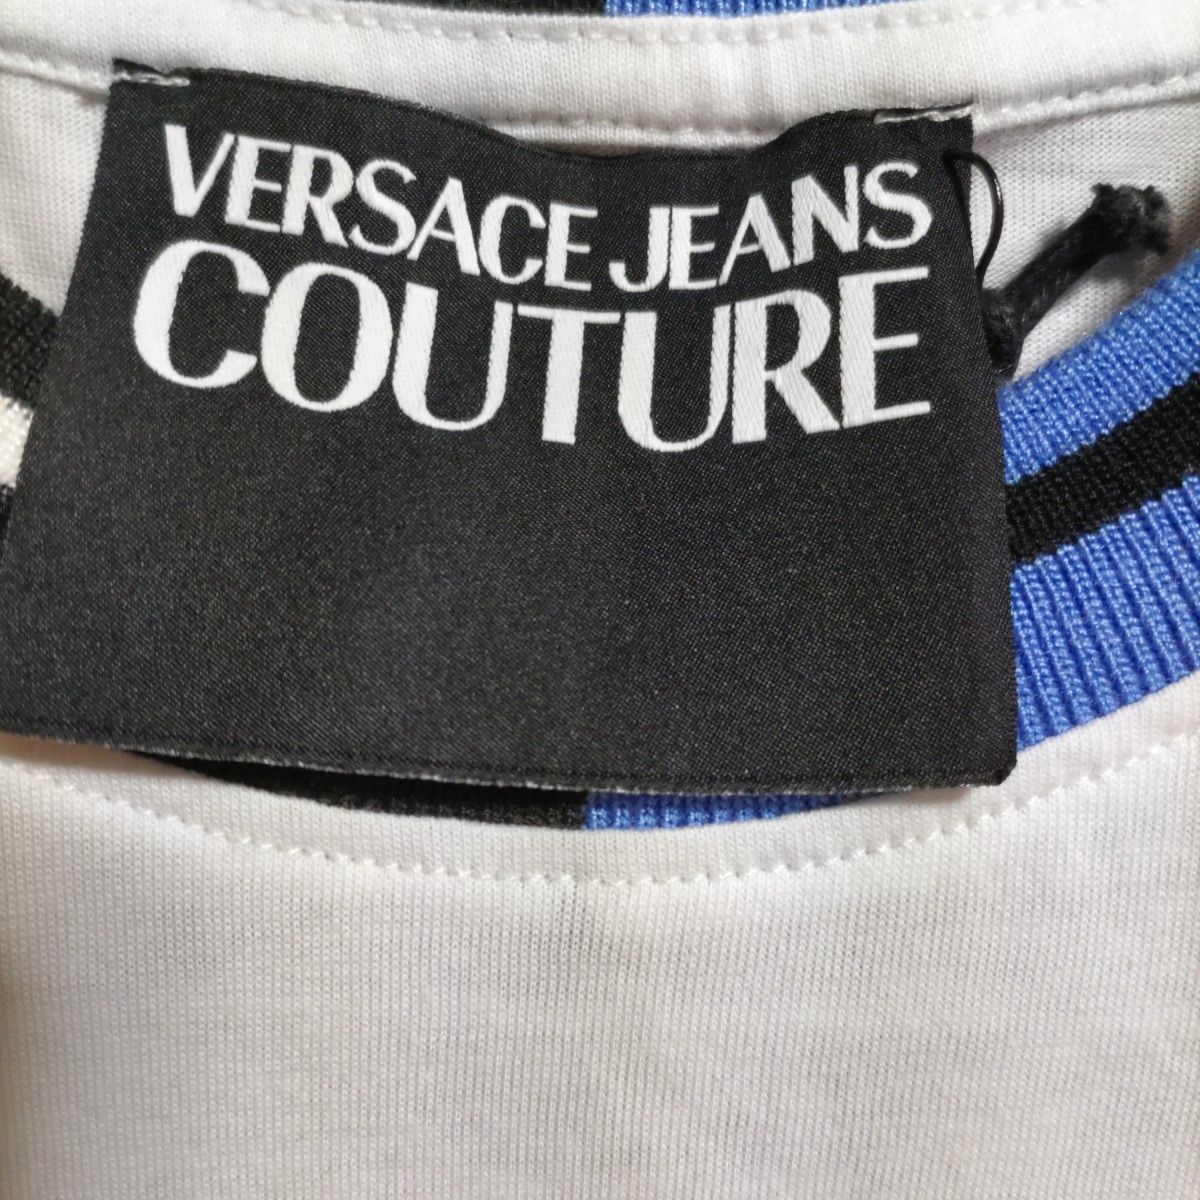 VERSACE JEANS COUTURE クルーネックTシャツ